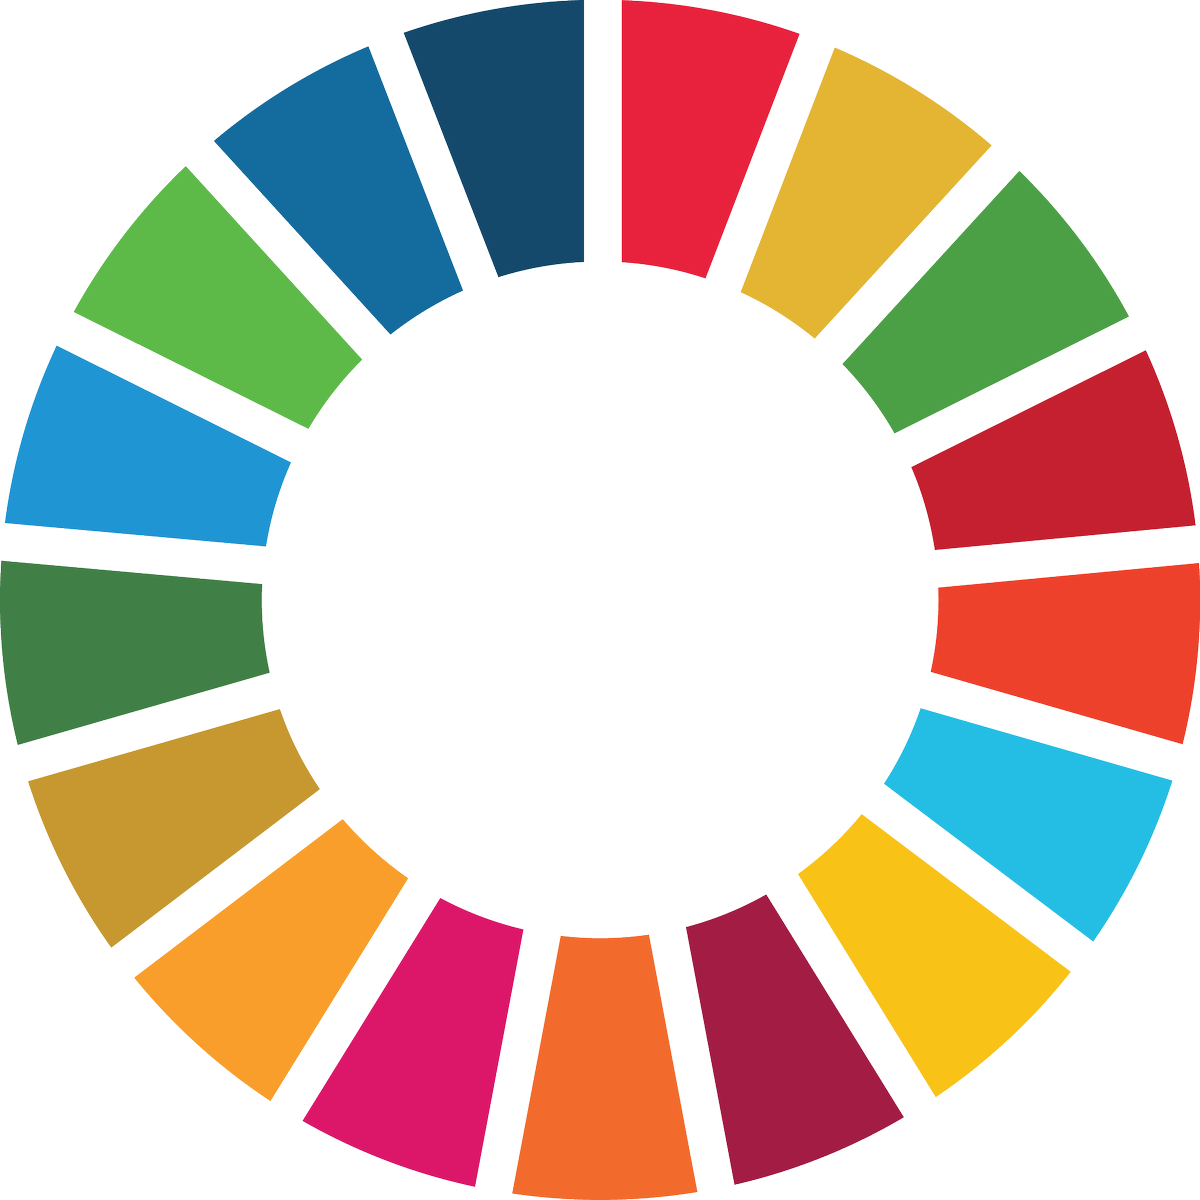 It's An - Sustainable Development Goals Circle (1200x1200)